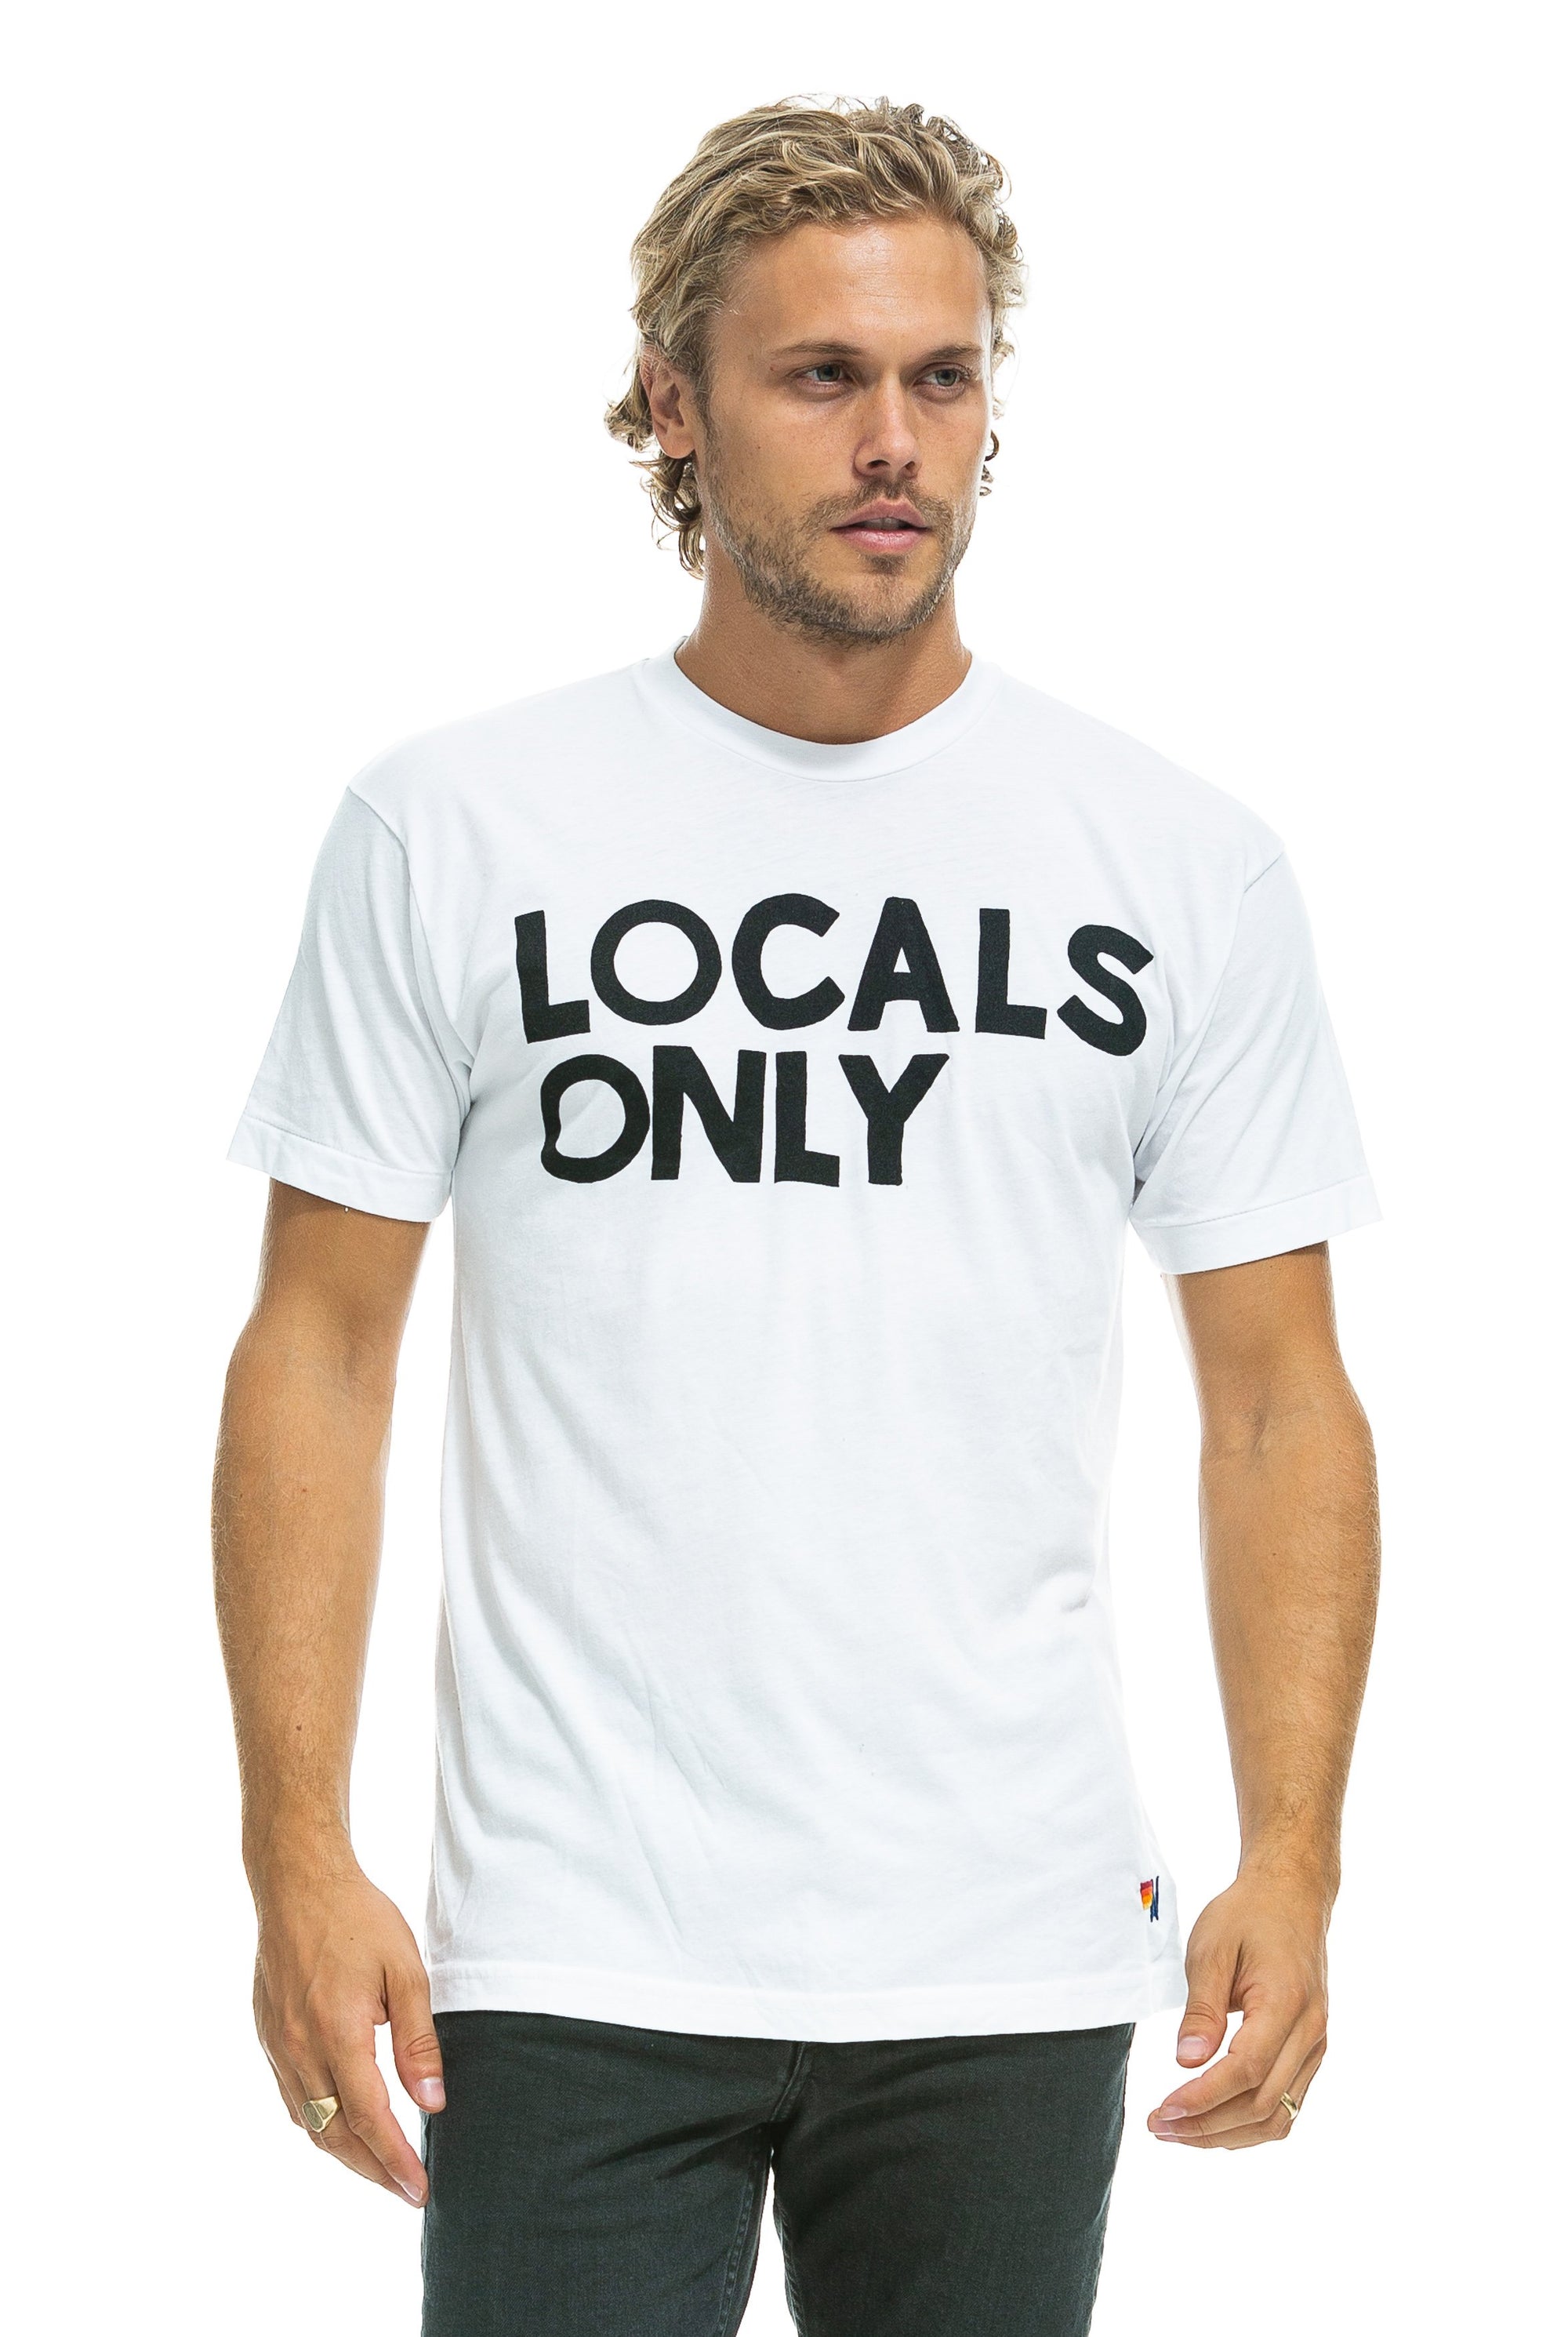 LOCALS ONLY TEE - WHITE Shirts & Tops Aviator Nation 